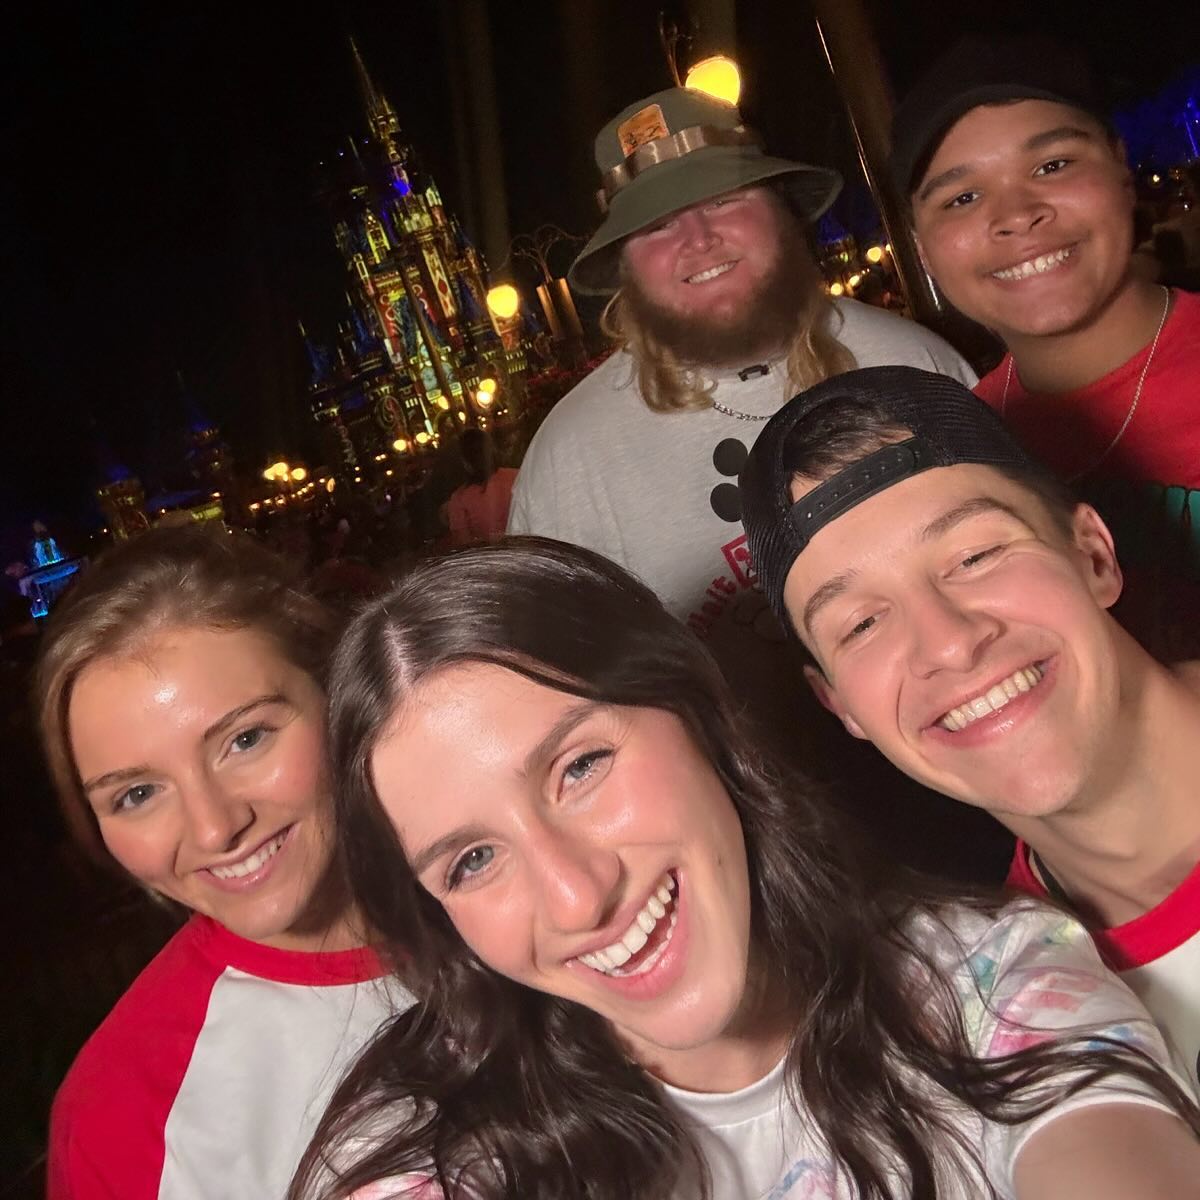 Emmy Russell competed on "Disney Night" with the "Idol"Top 5